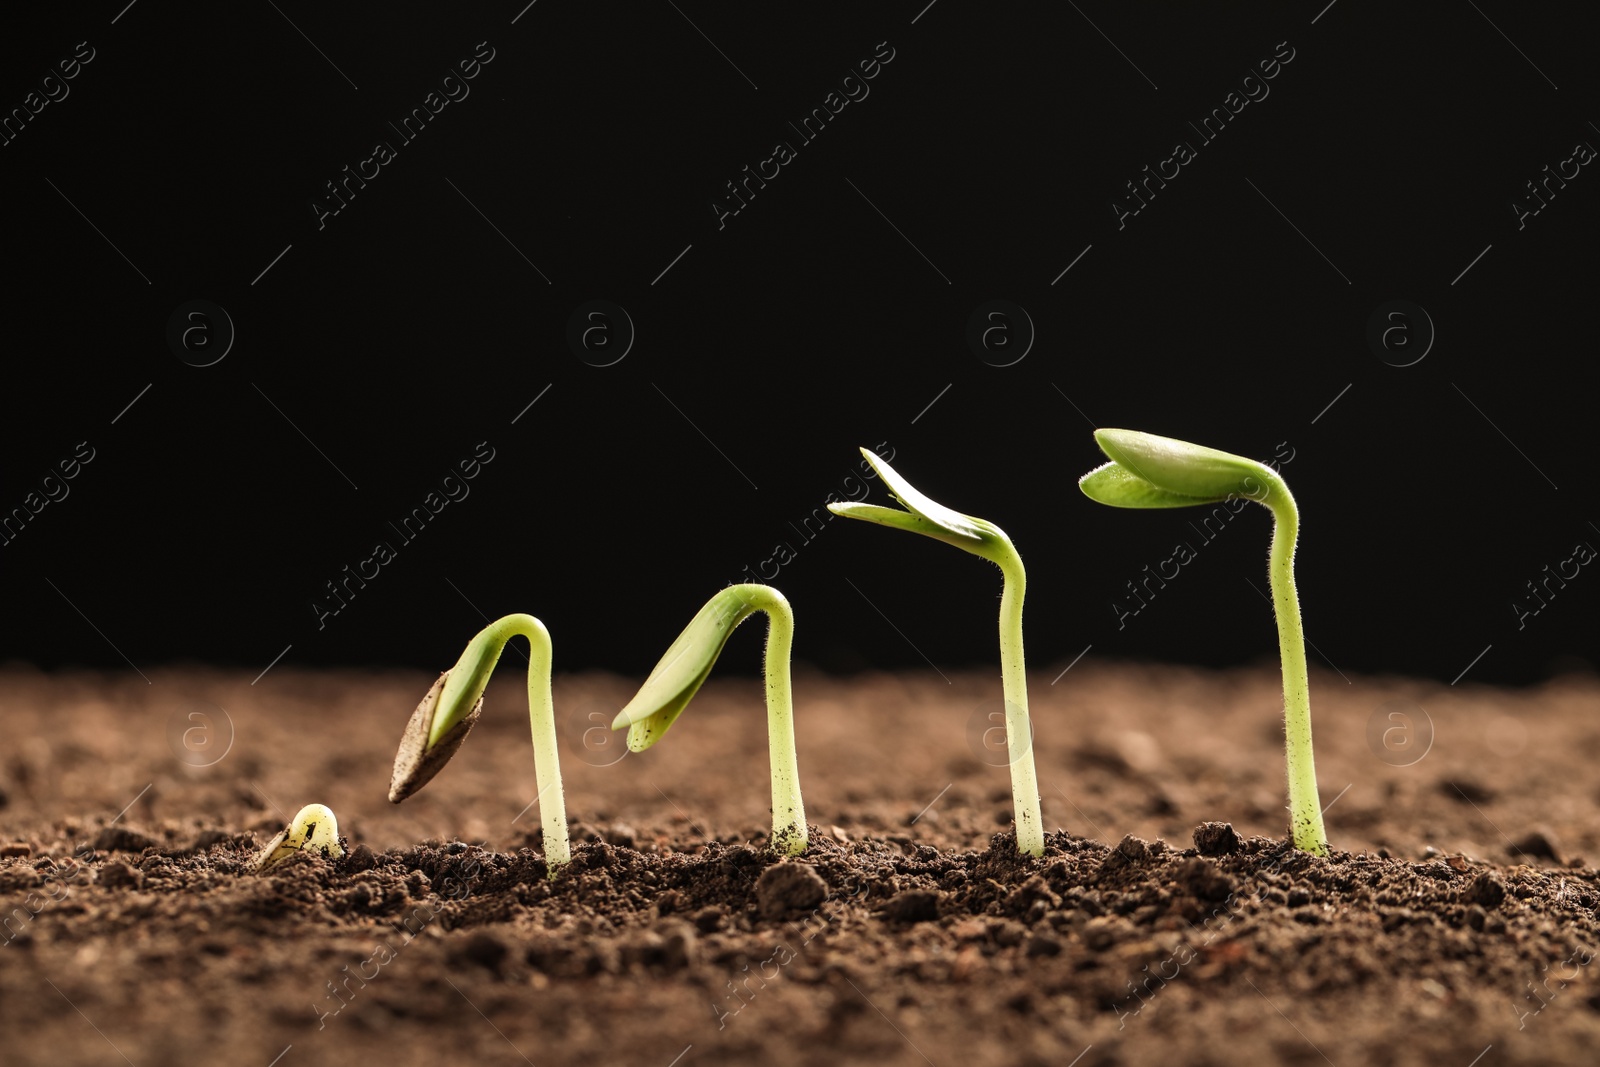 Photo of Little green seedlings growing in soil against black background, closeup view